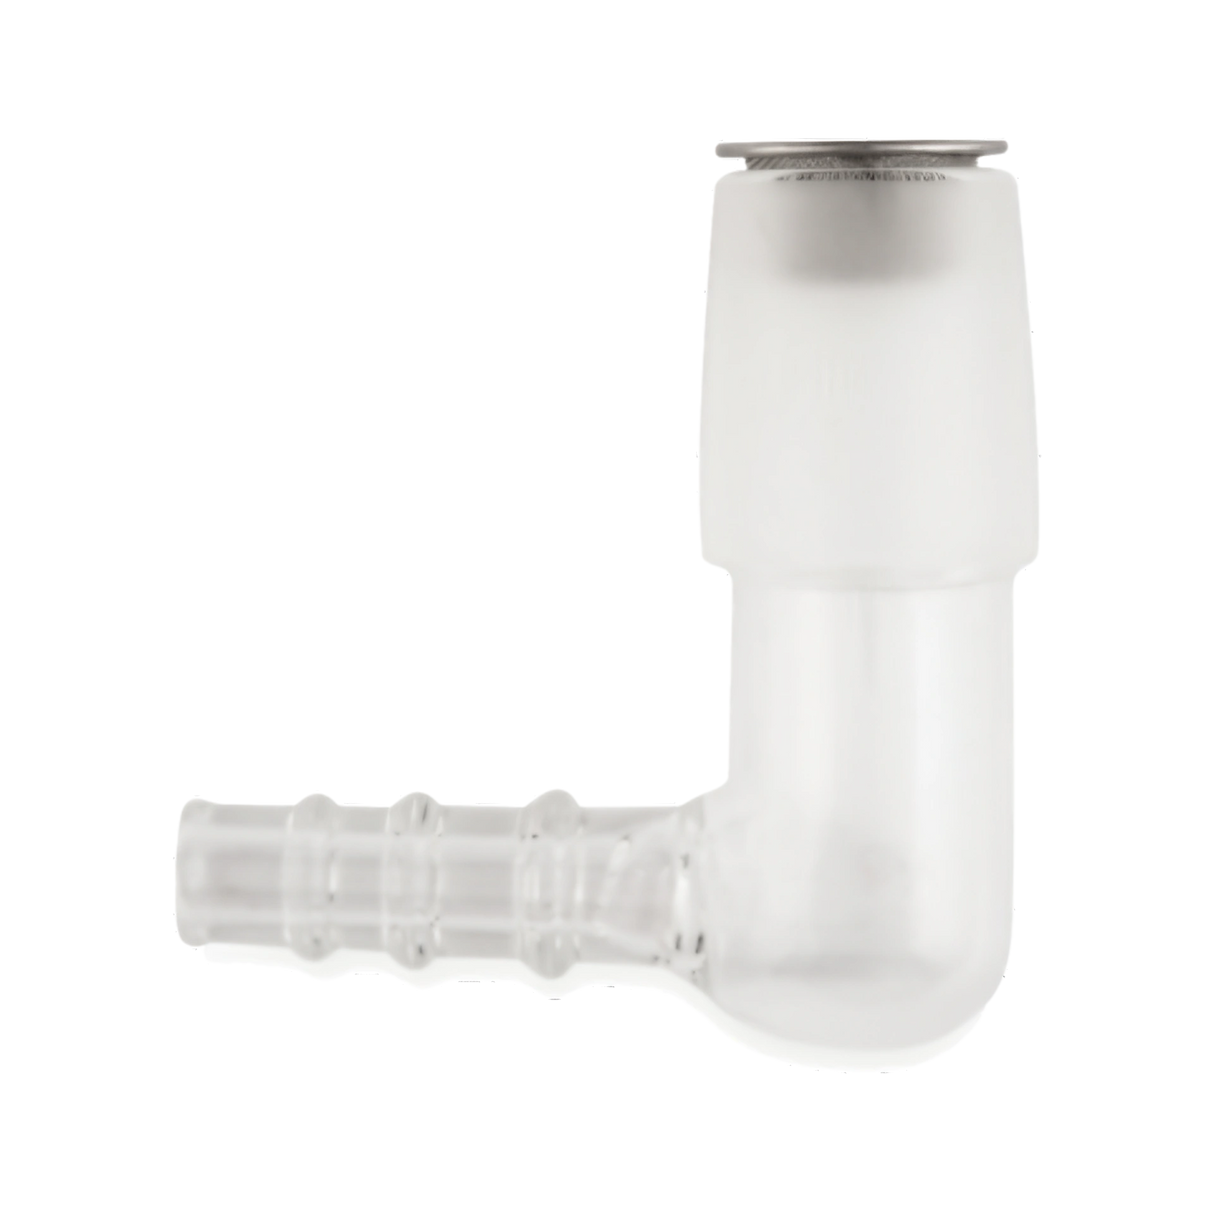 Arizer Glass Elbow Adapter, clear borosilicate glass, compact design, for vaporizers, side view